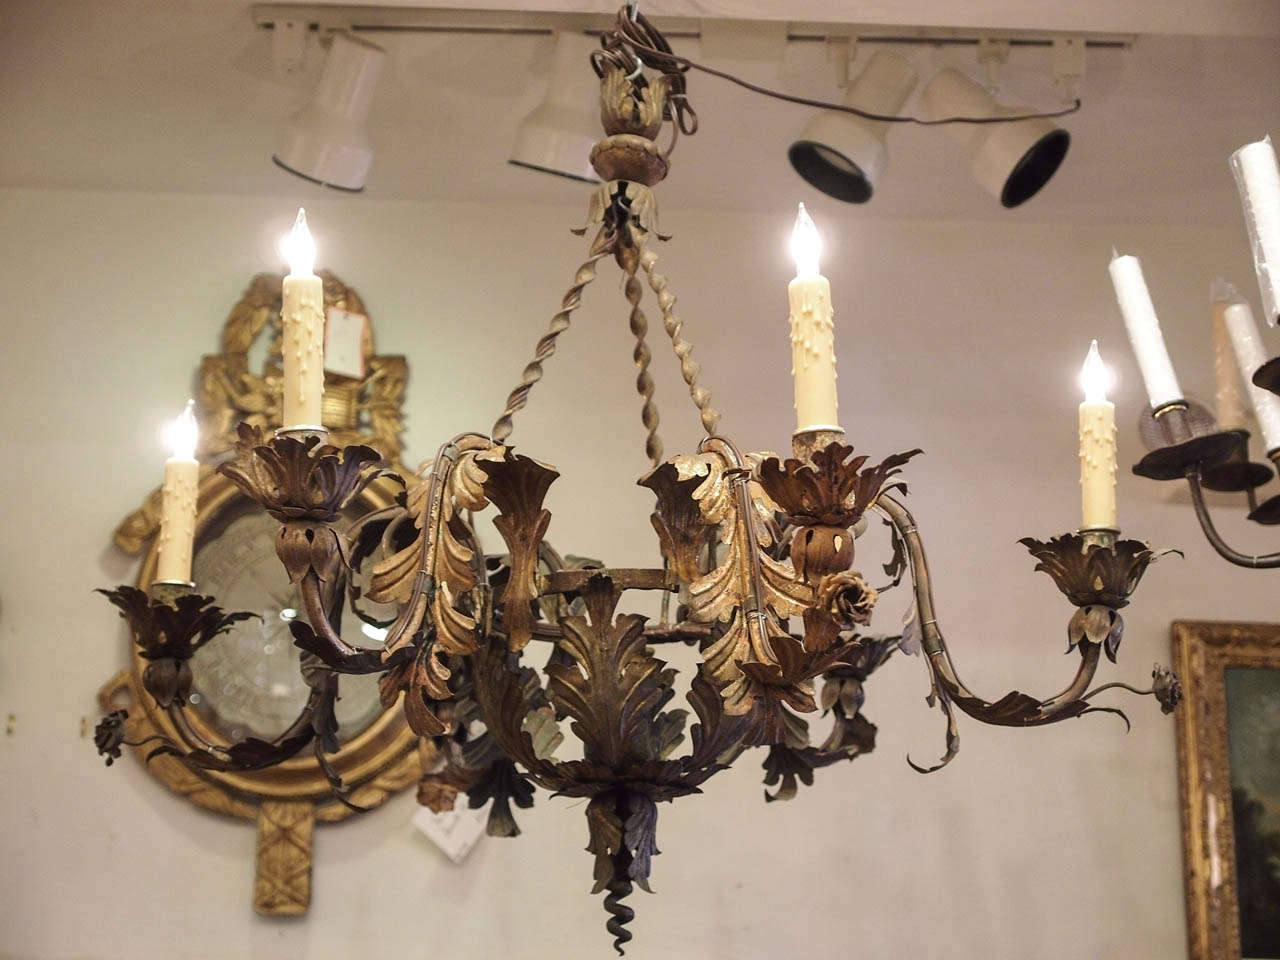 19th century Italian gilt iron light fixture with acanthus leaves motif and 6 candle arms.